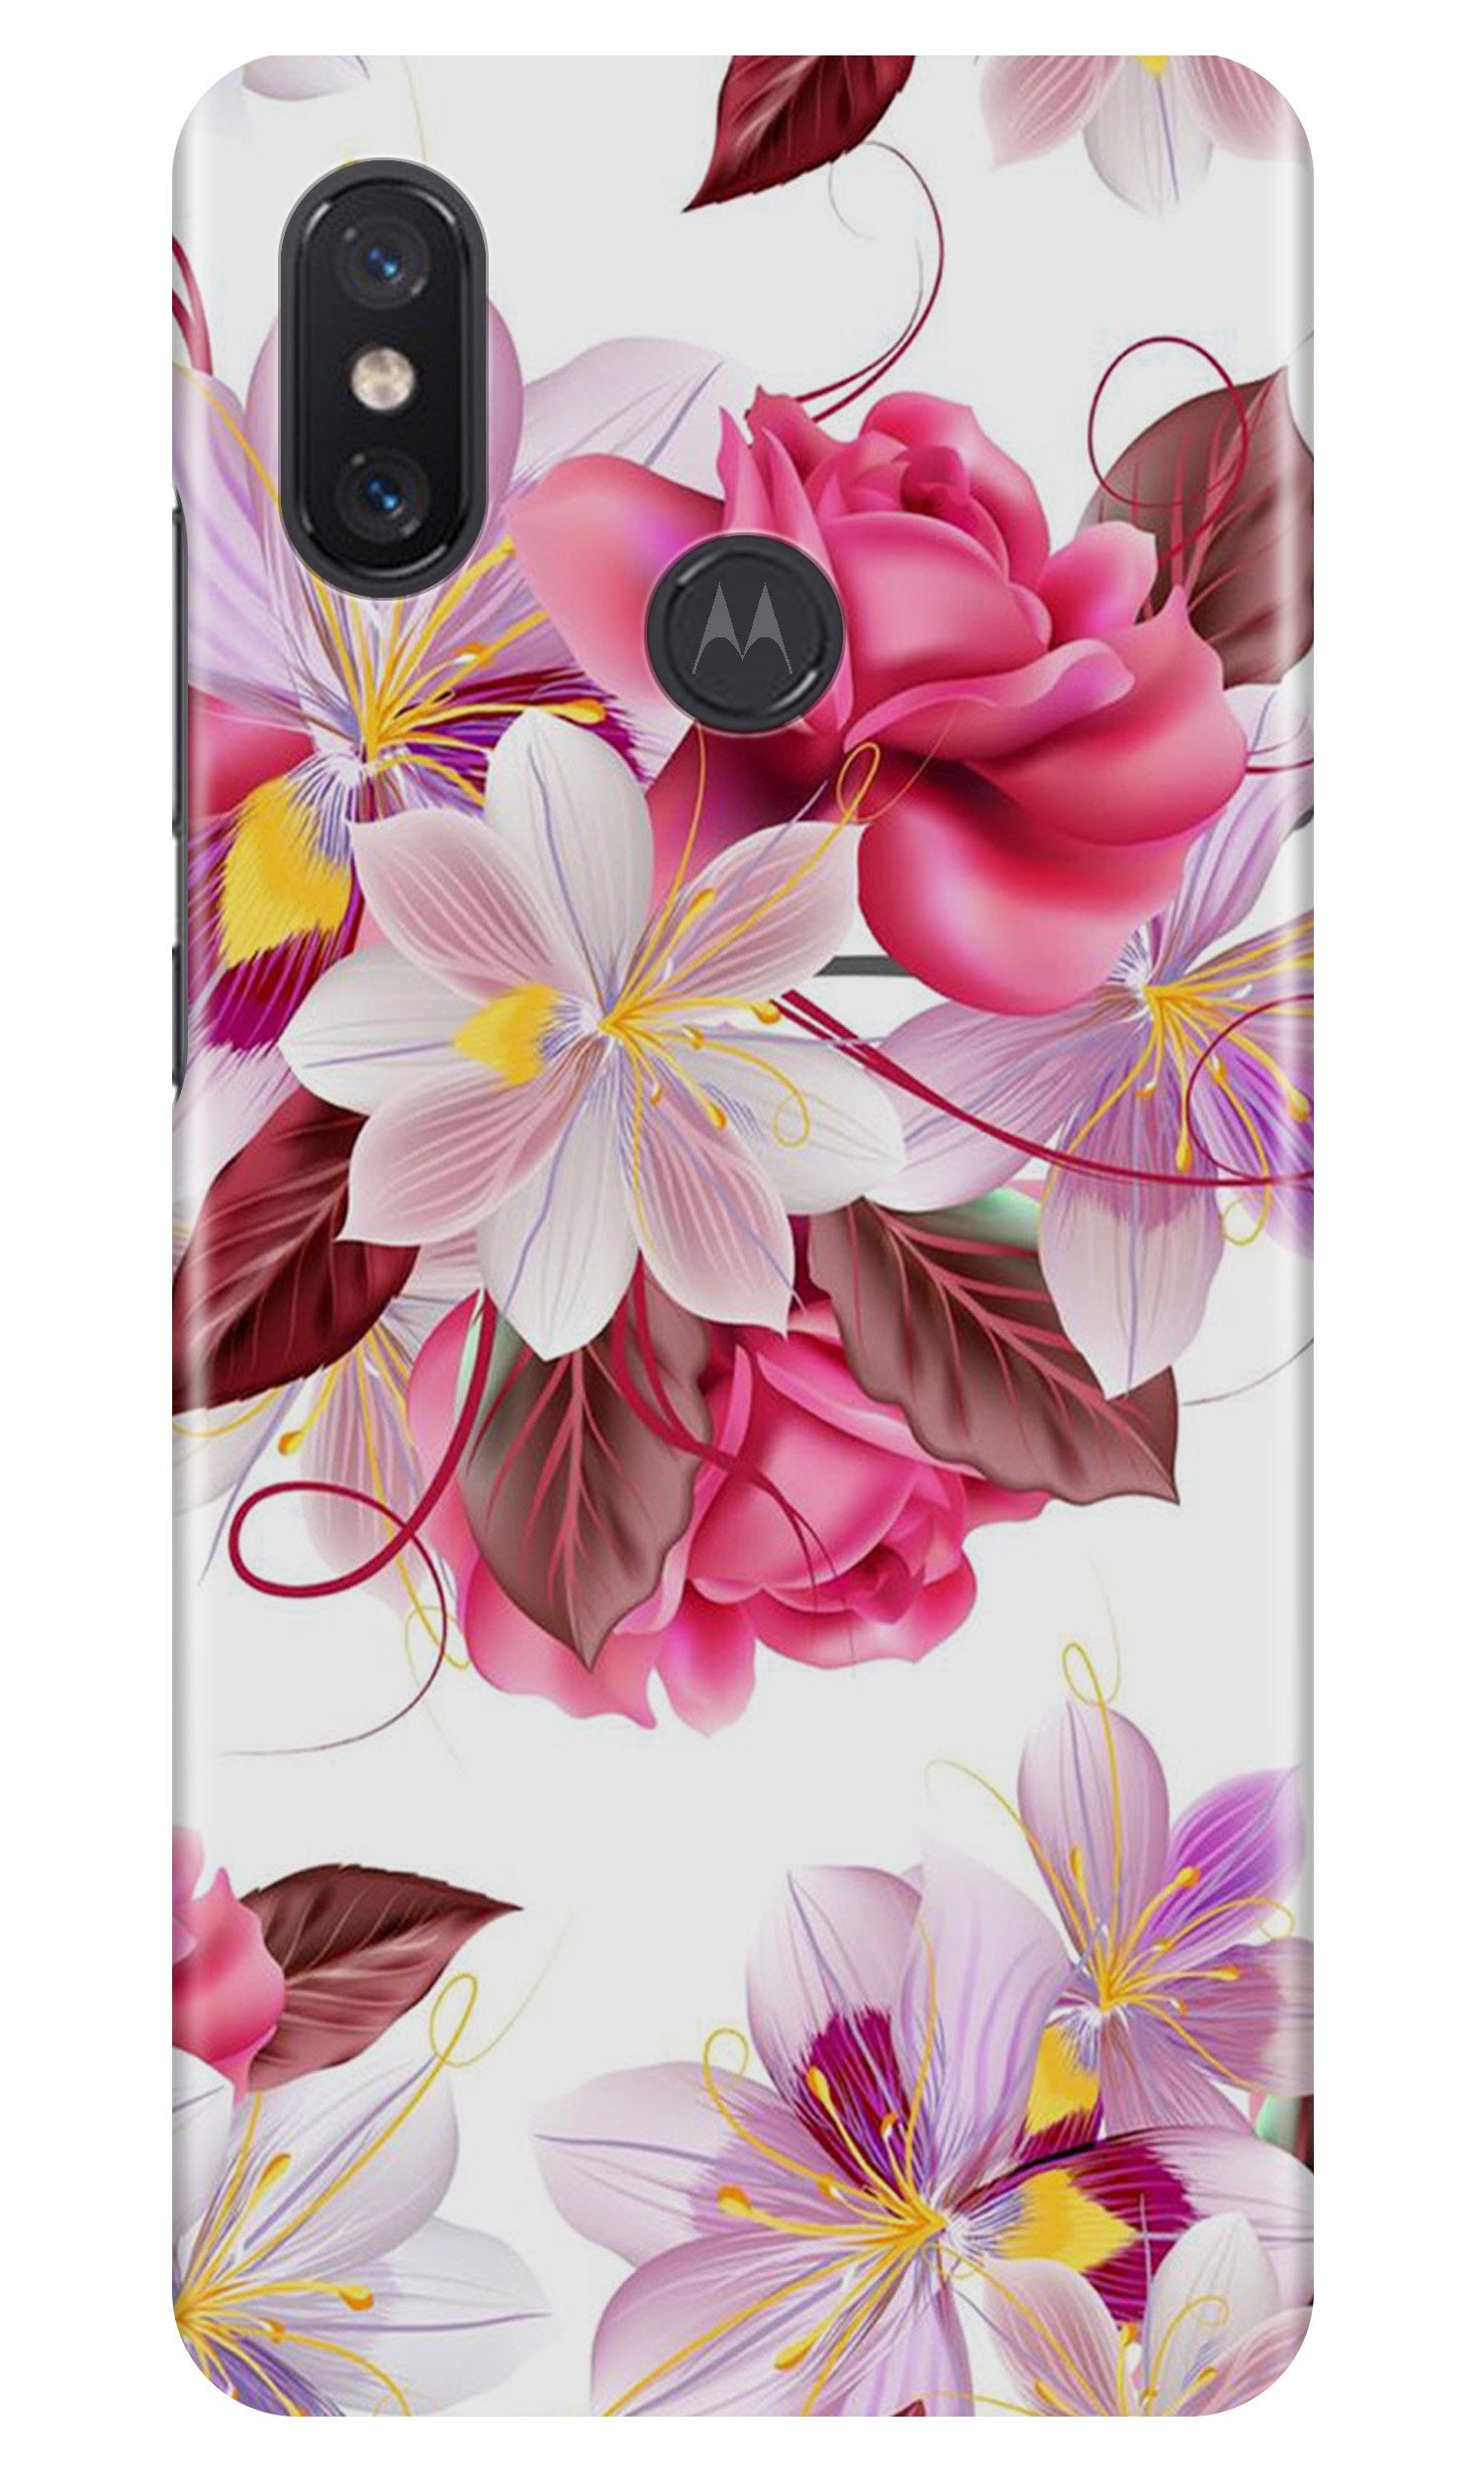 Beautiful flowers Case for Moto One Power